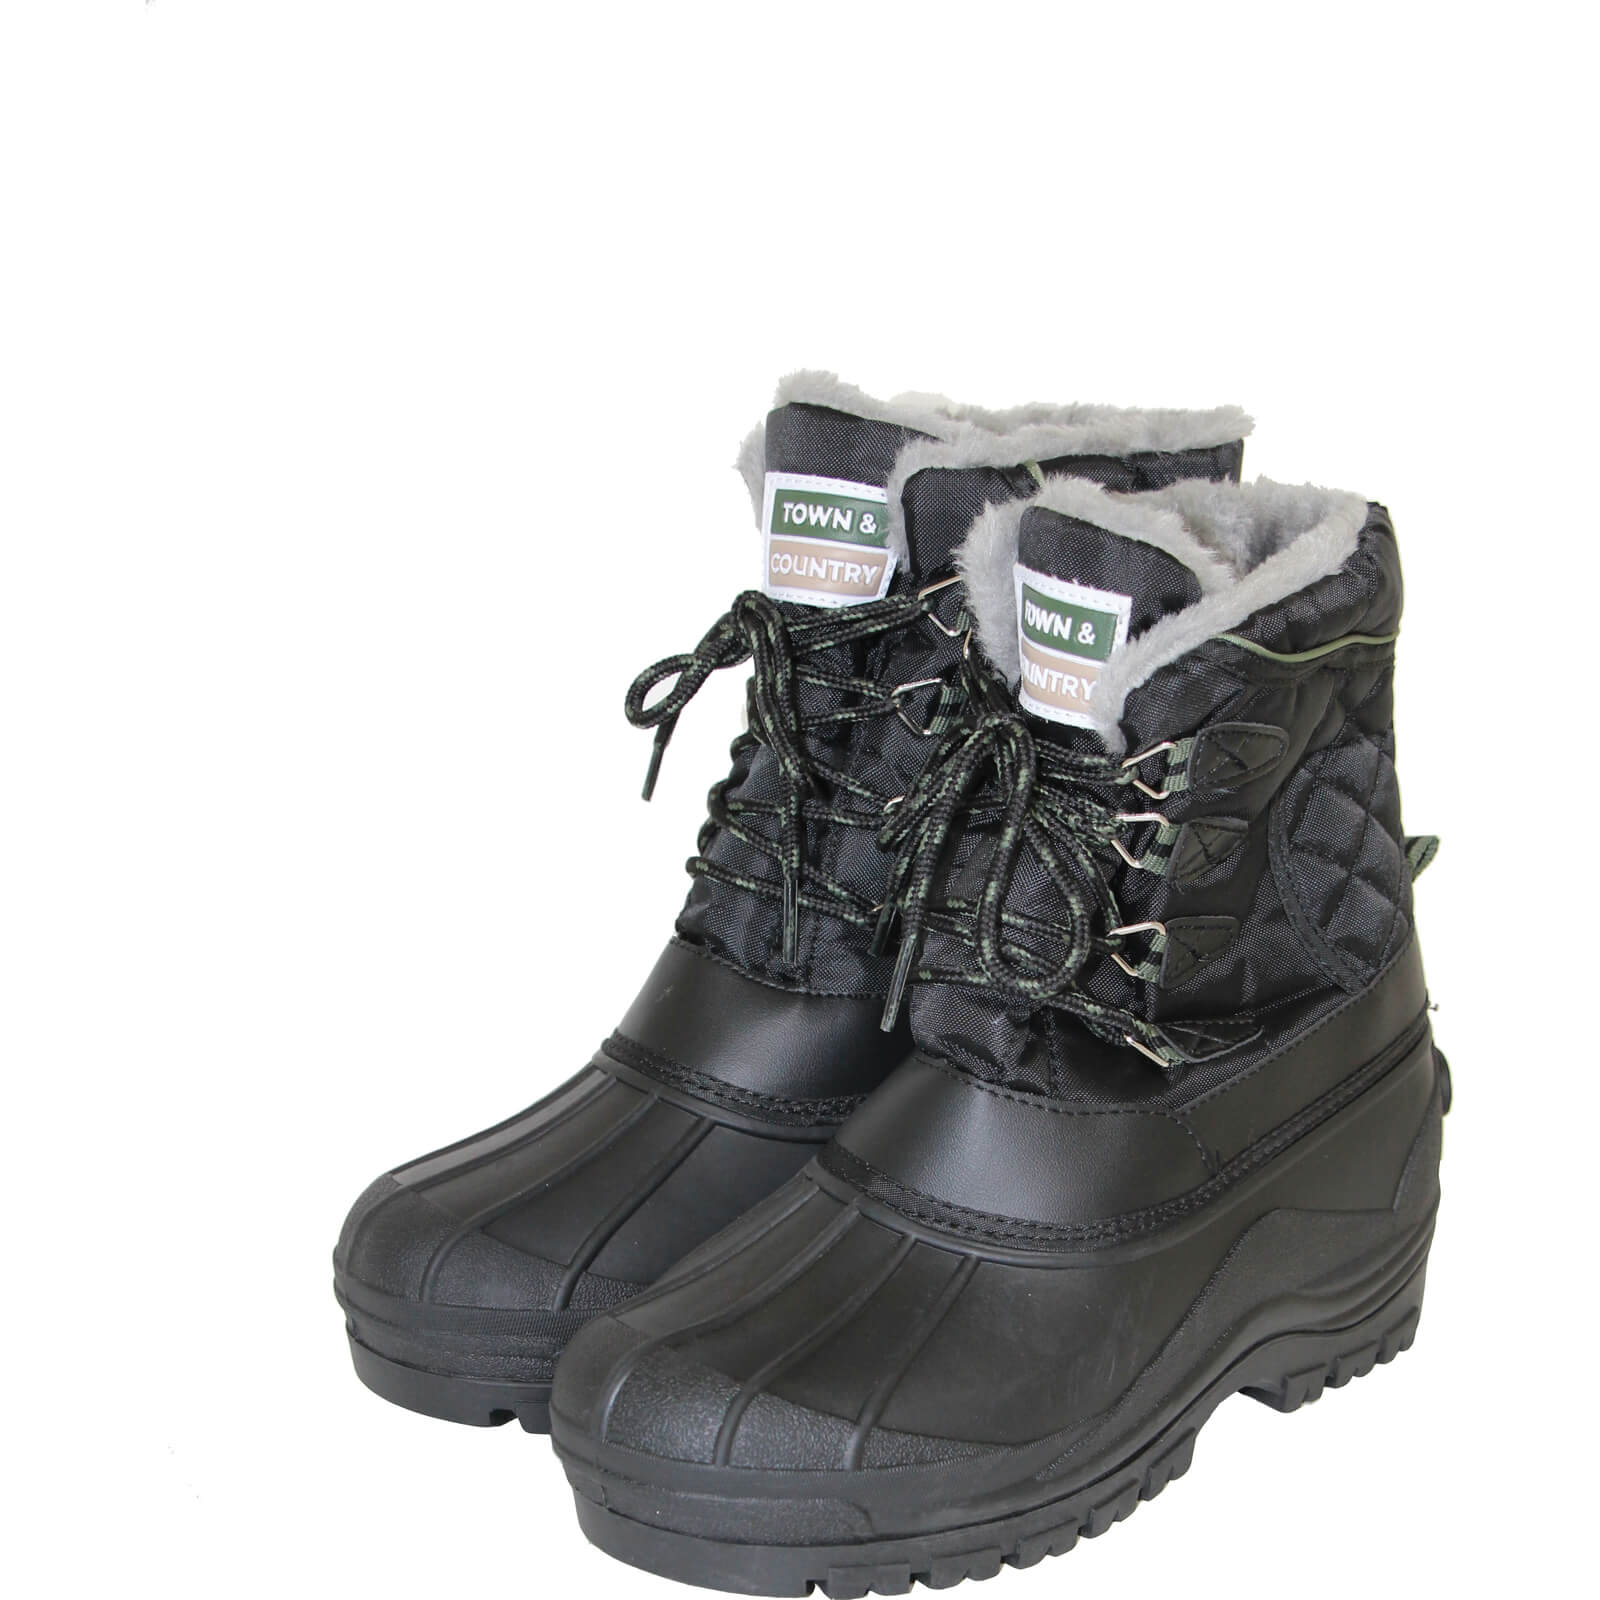 Image of Town and Country Curbridge Waterproof Lined Winter Boots Black Size 5